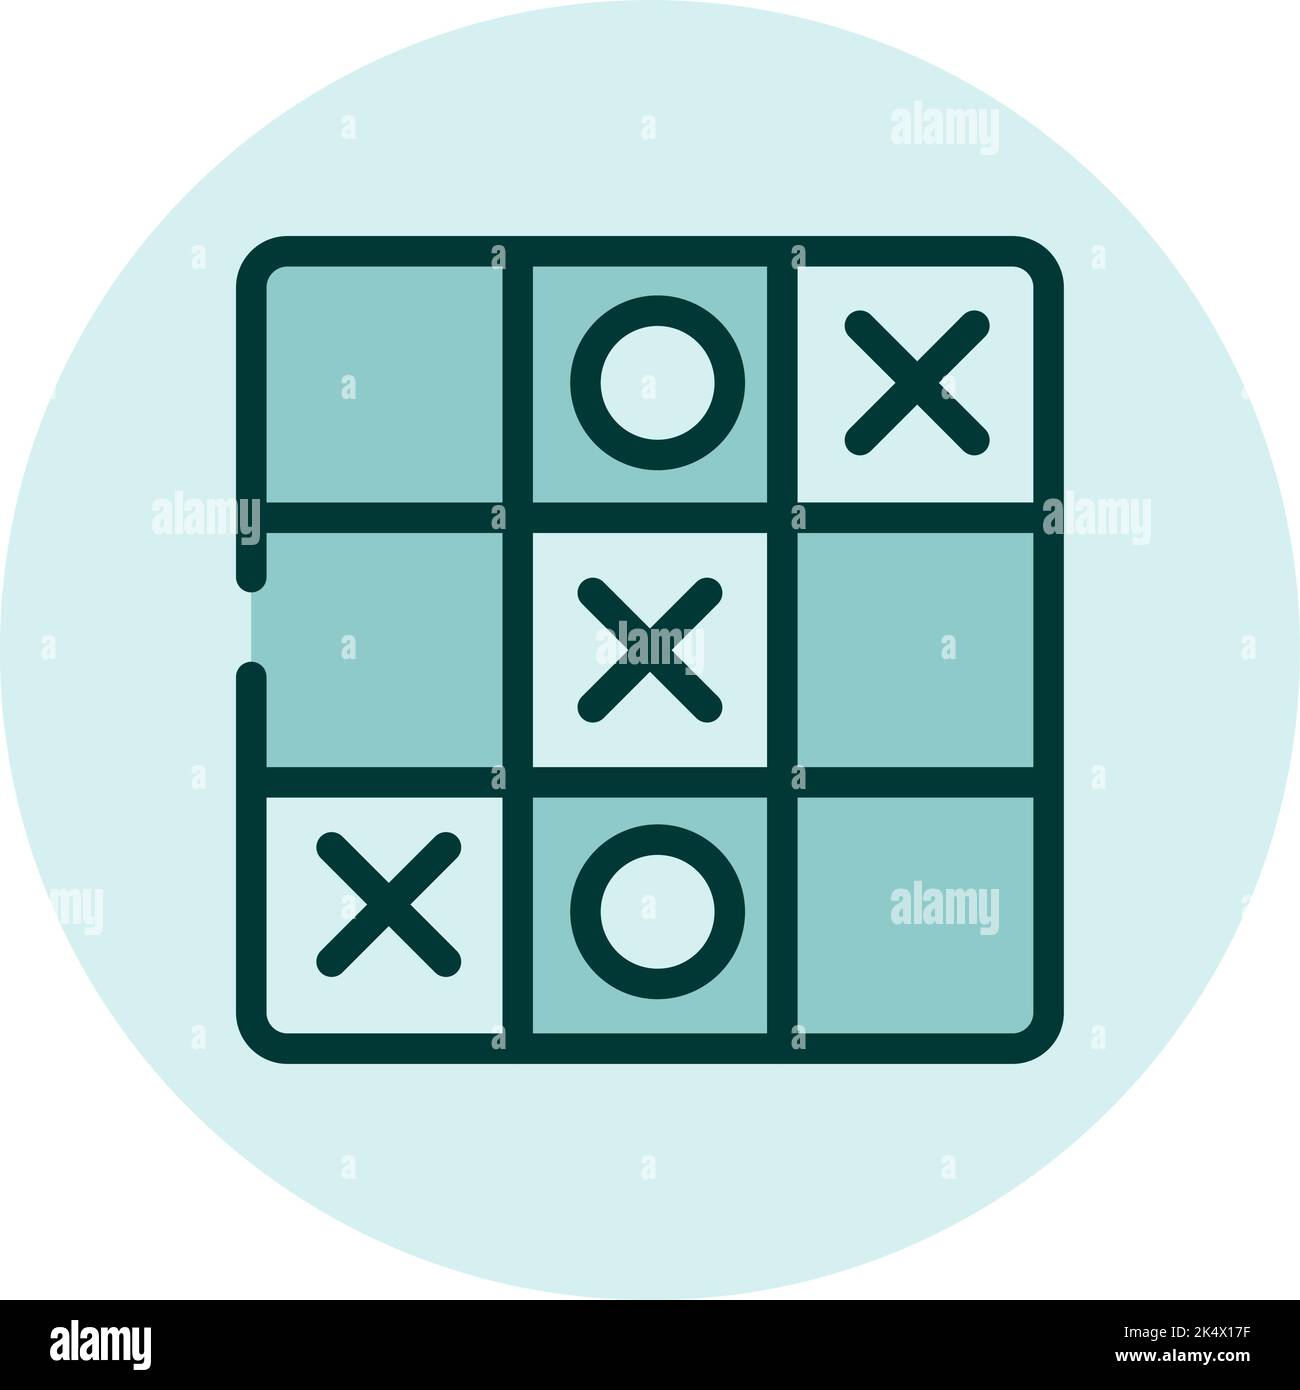 Tictactoe Stock Vector Illustration and Royalty Free Tictactoe Clipart